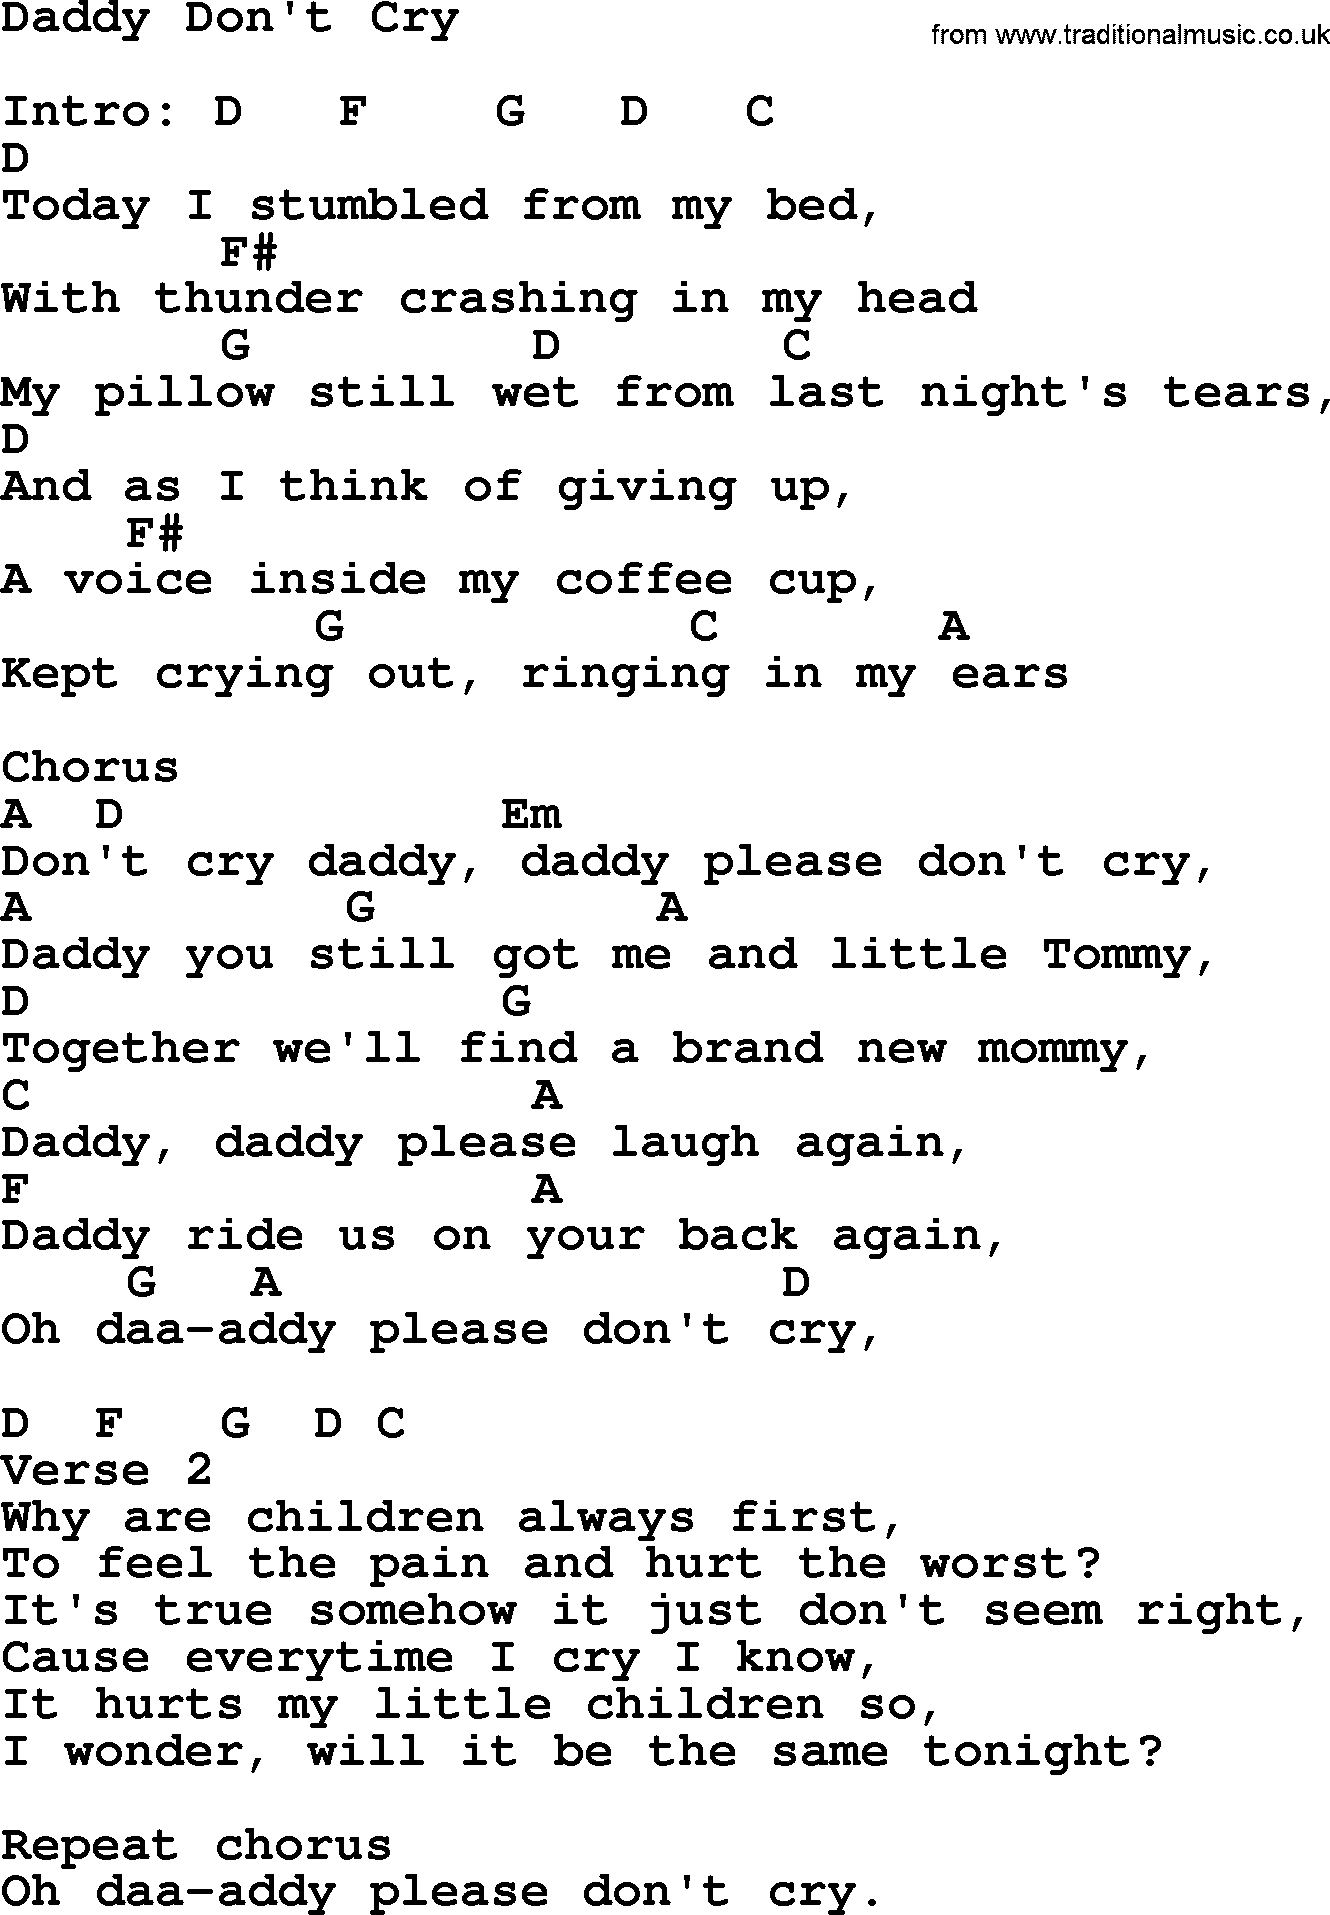 Elvis Presley song: Daddy Don't Cry, lyrics and chords